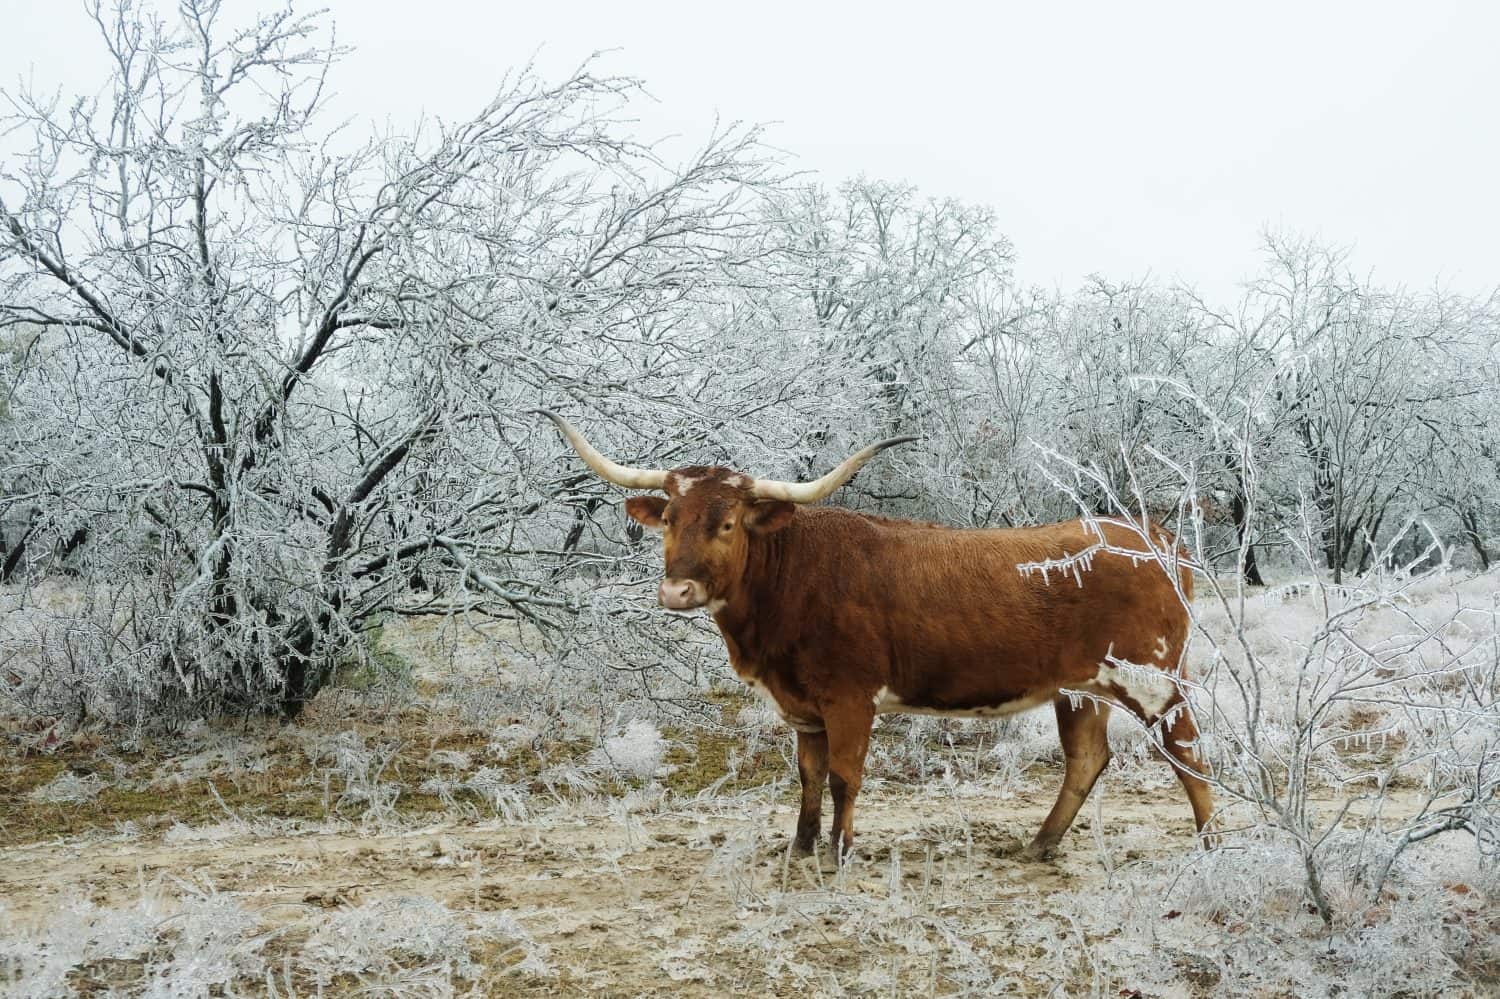 Unhappy Longhorn cow in freezing cold weather, shows Texas landscape under ice with depth of field.